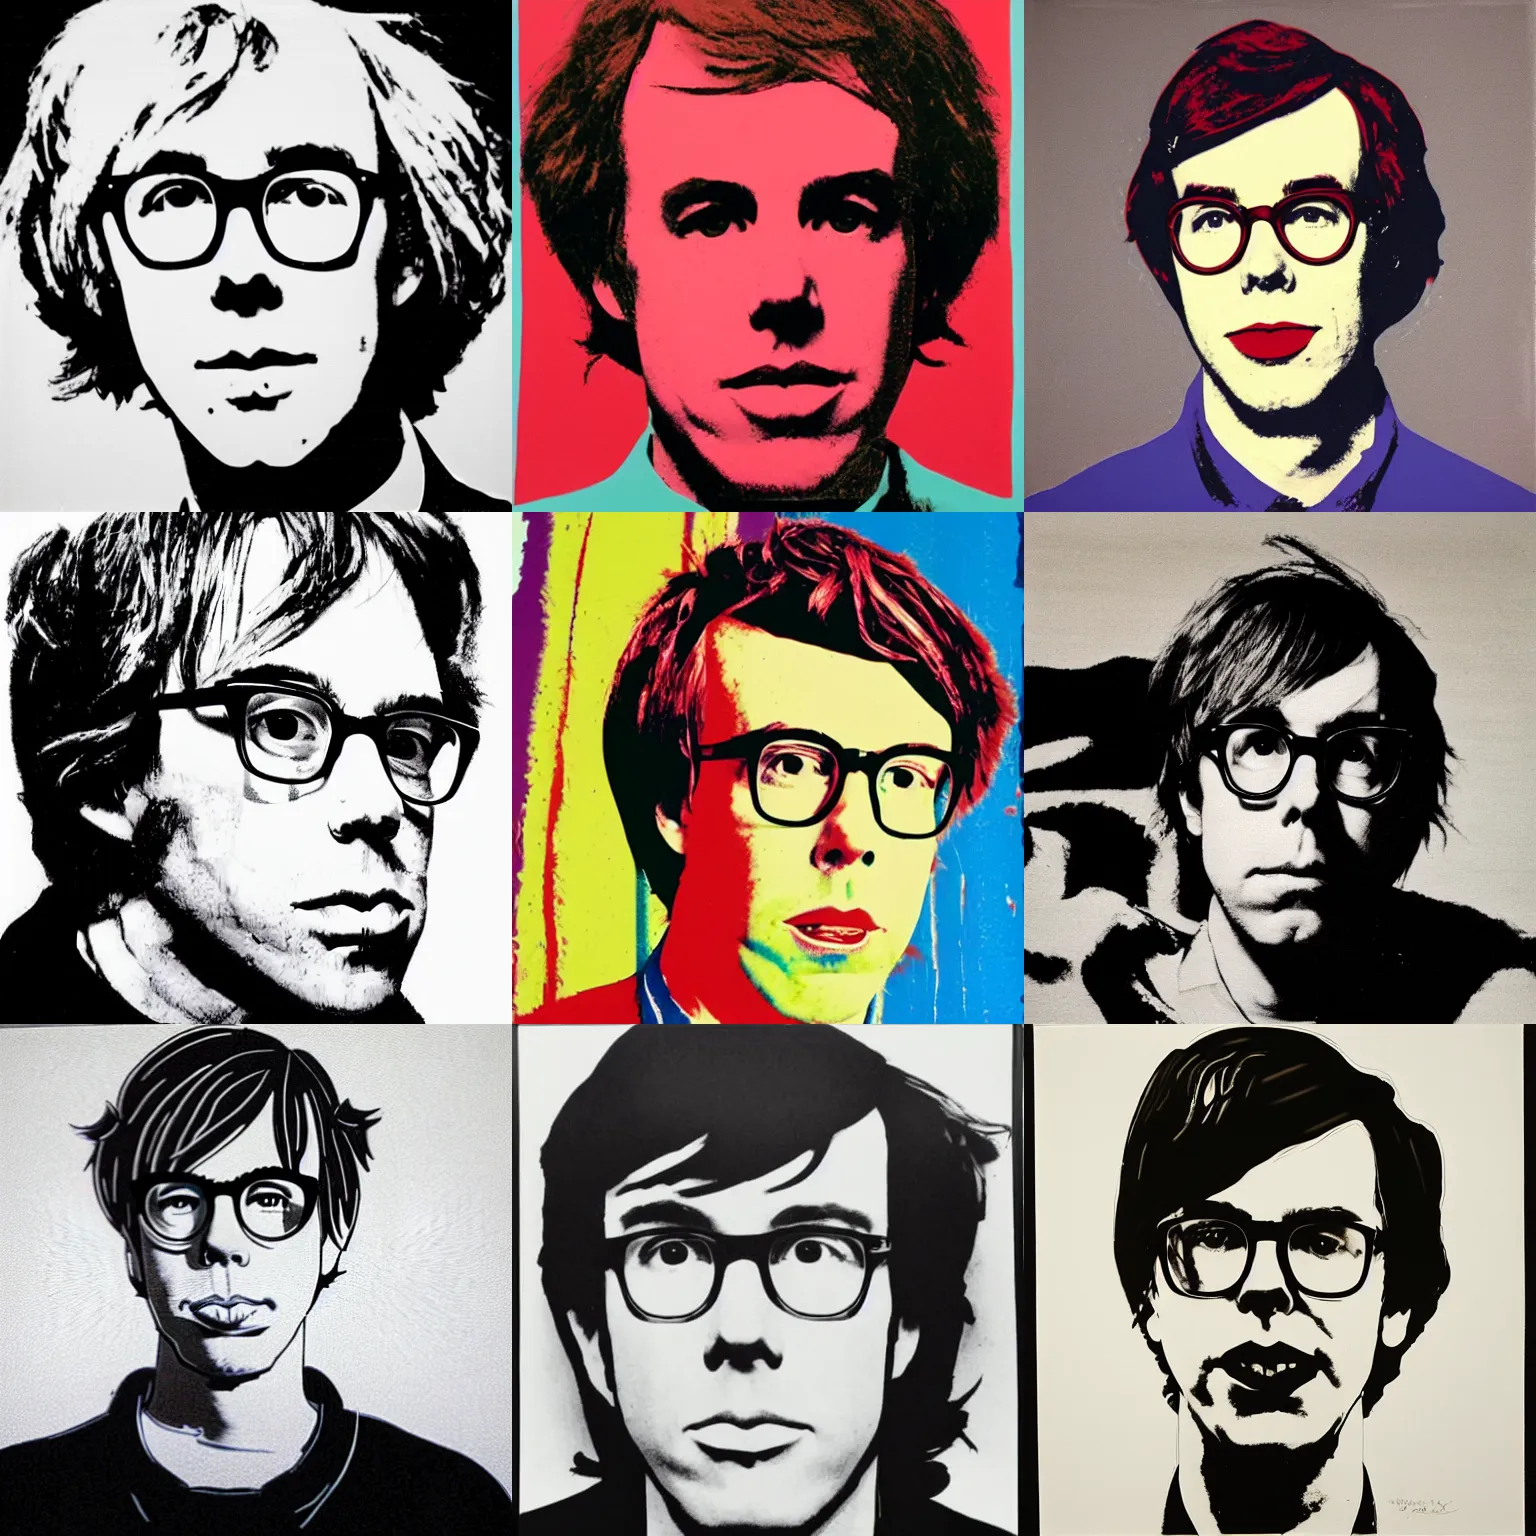 Prompt: portrait of Ben Folds by Andy Warhol